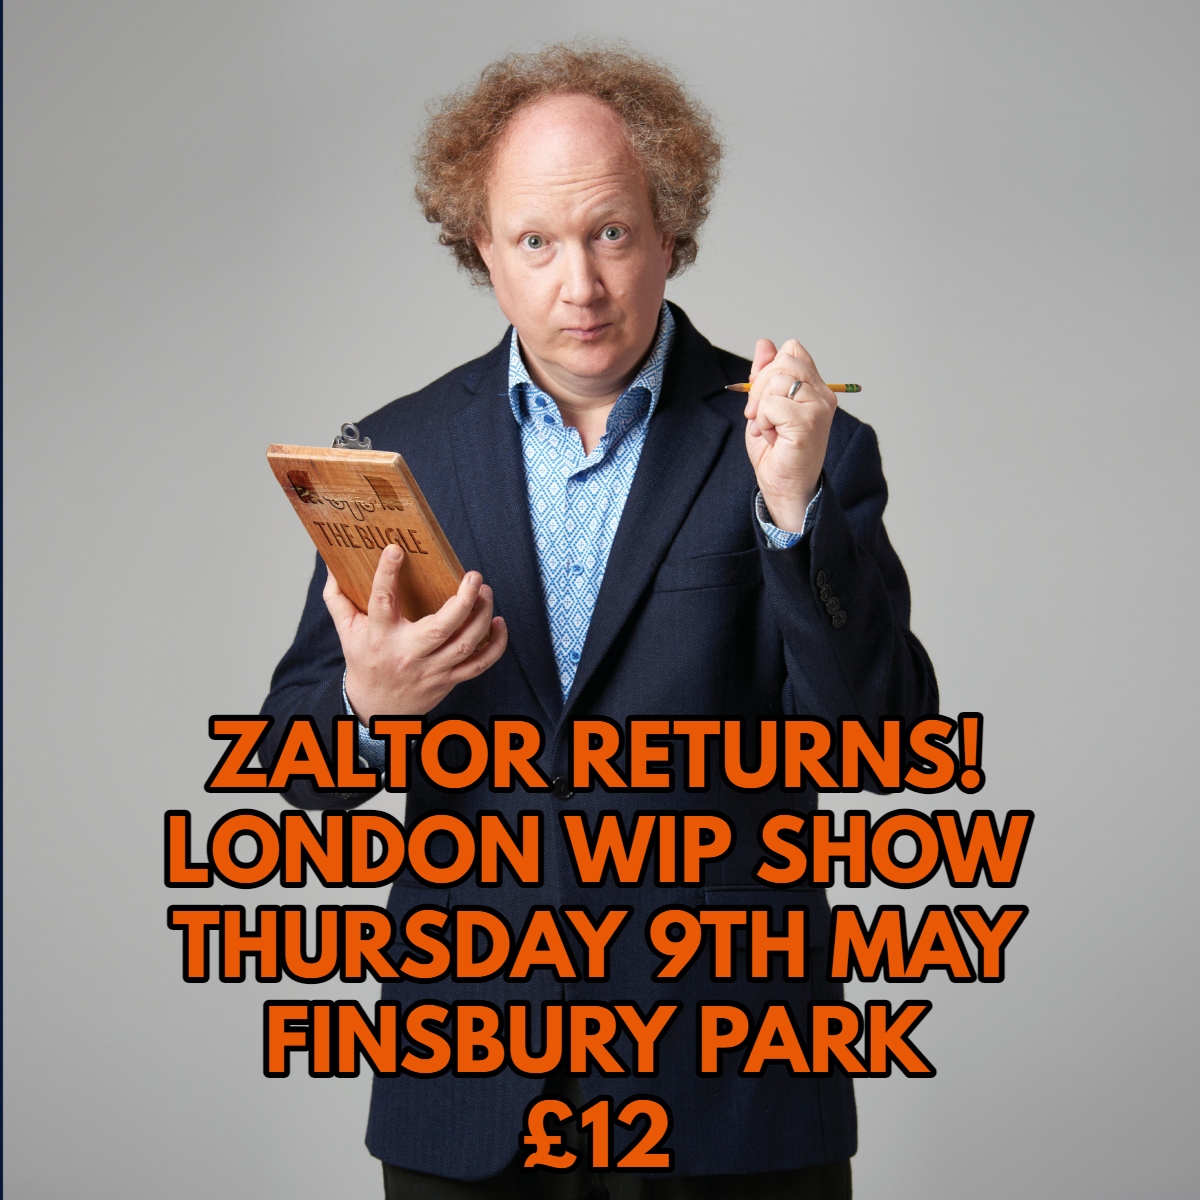 We're back @SwimmerN7 this Thursday May 9th as we welcome returning mad king of satire @ZaltzCricket. If you like your comedy peppered with baroque sports metaphors and ludicrous puns, you'll love this. Get stuck in here: …od-ship-comedy-club.designmynight.com/6596d9368243c5…